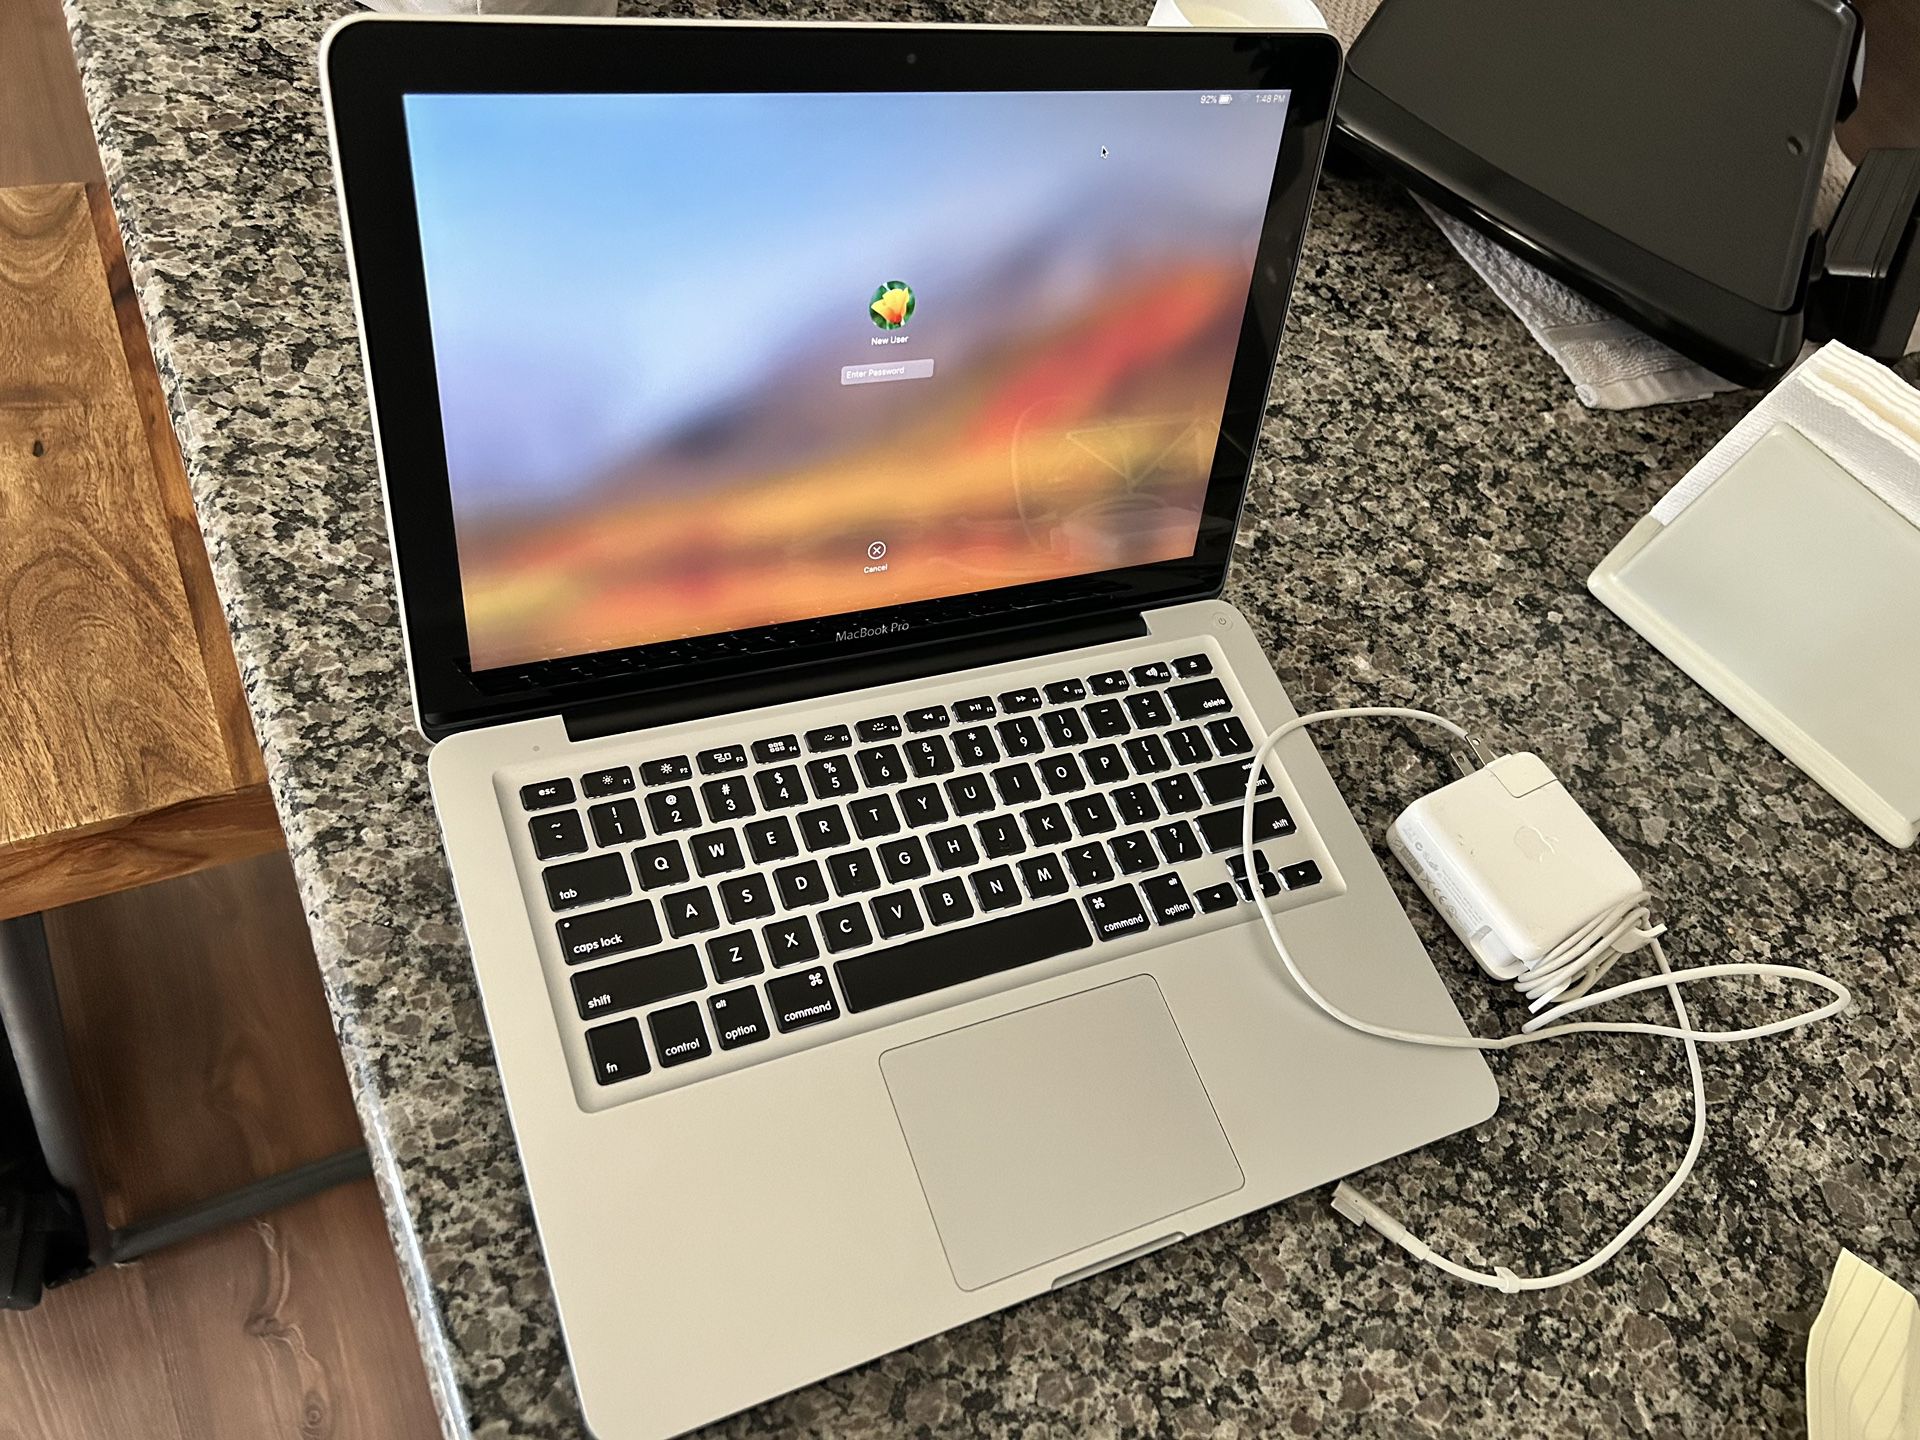 MacBook Pro A1278 In Great Condition!